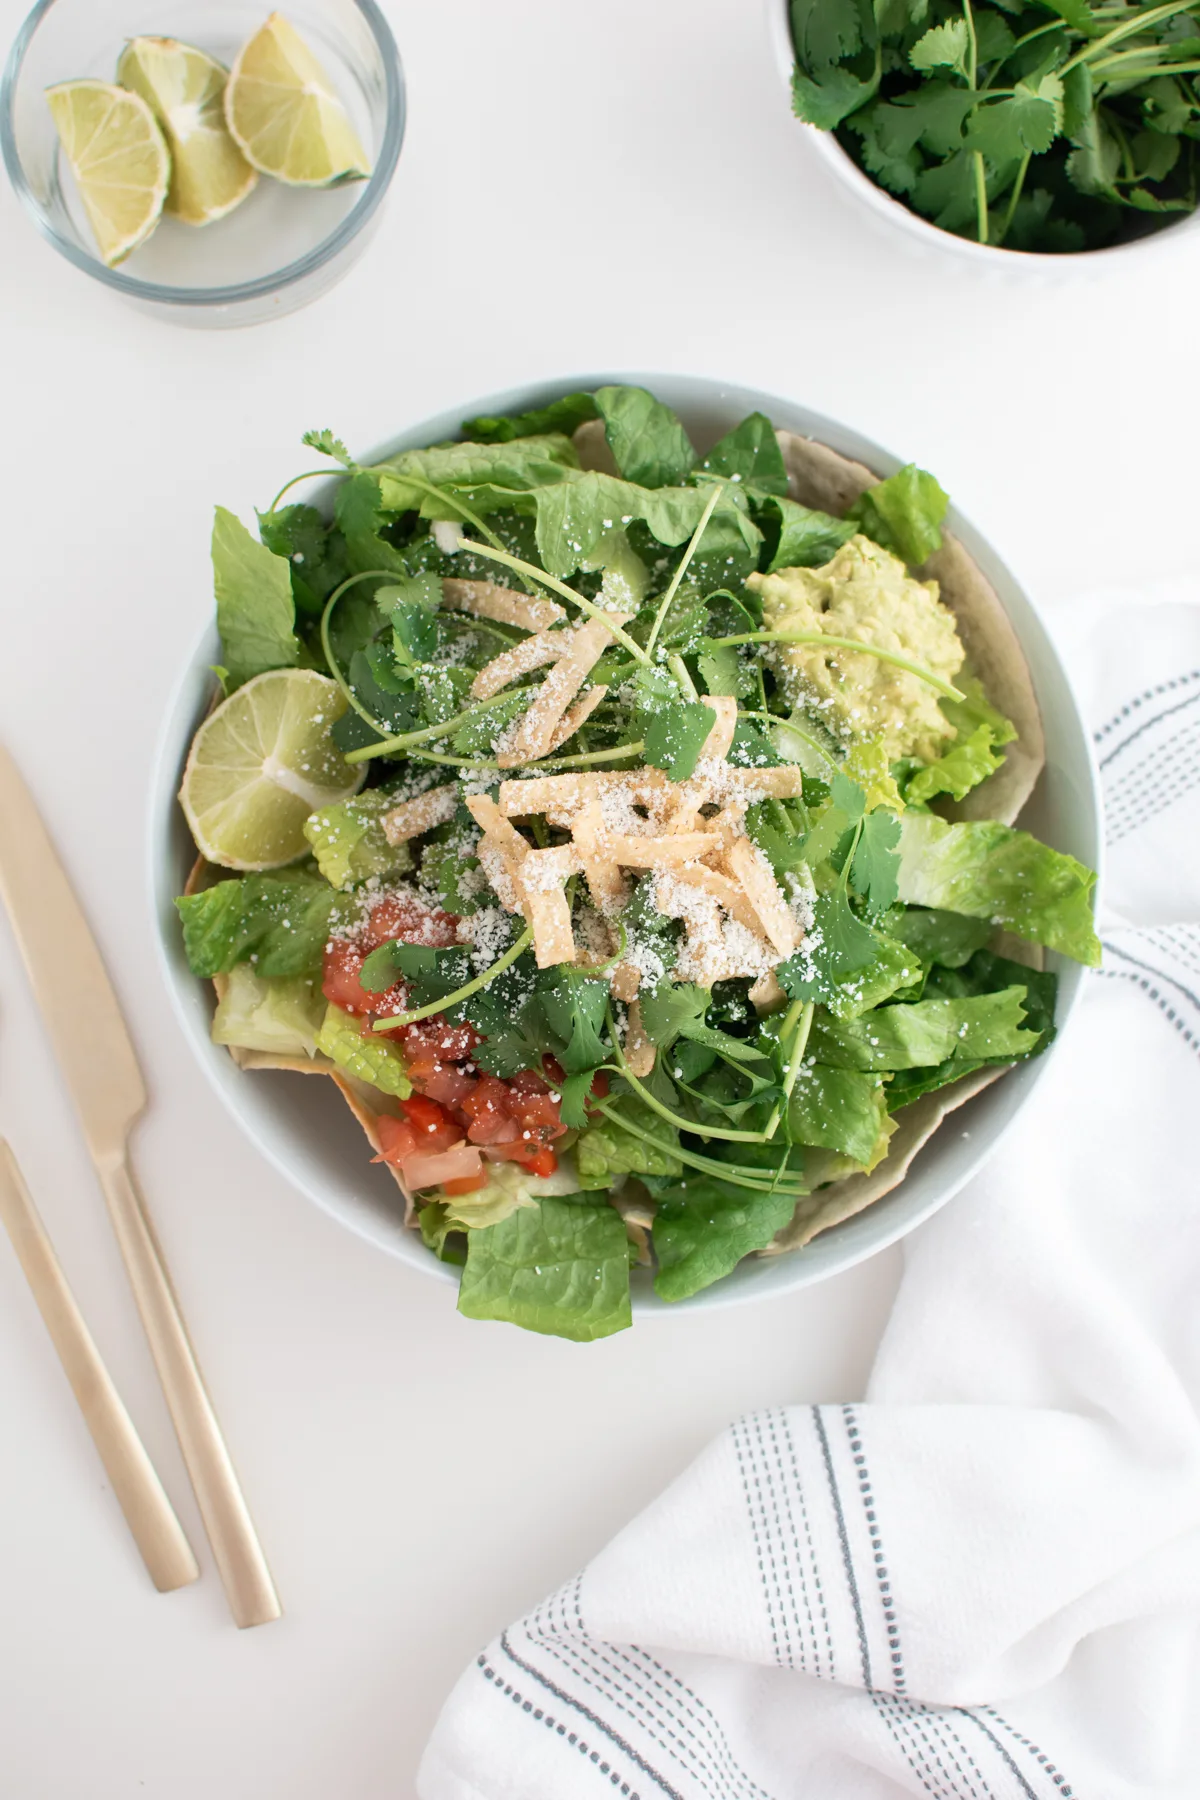 Cafe Rio salad recipe in white bowl surrounded by bowl of limes, cilantro, a white kitchen towel, and gold utensils.